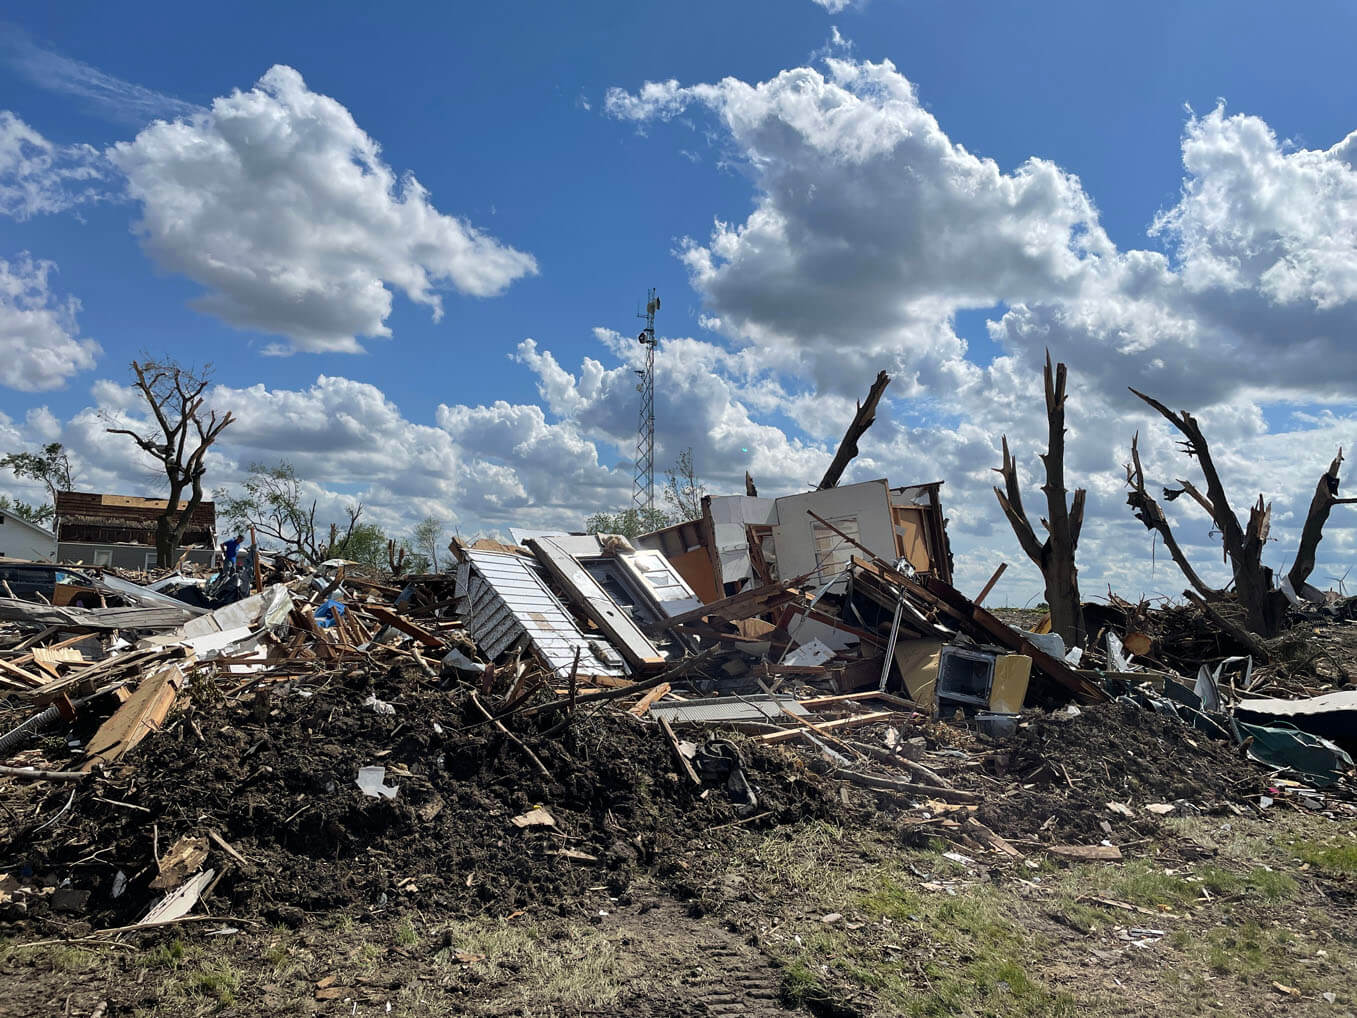 For some families, the damage was complete, raking homes from their foundations.